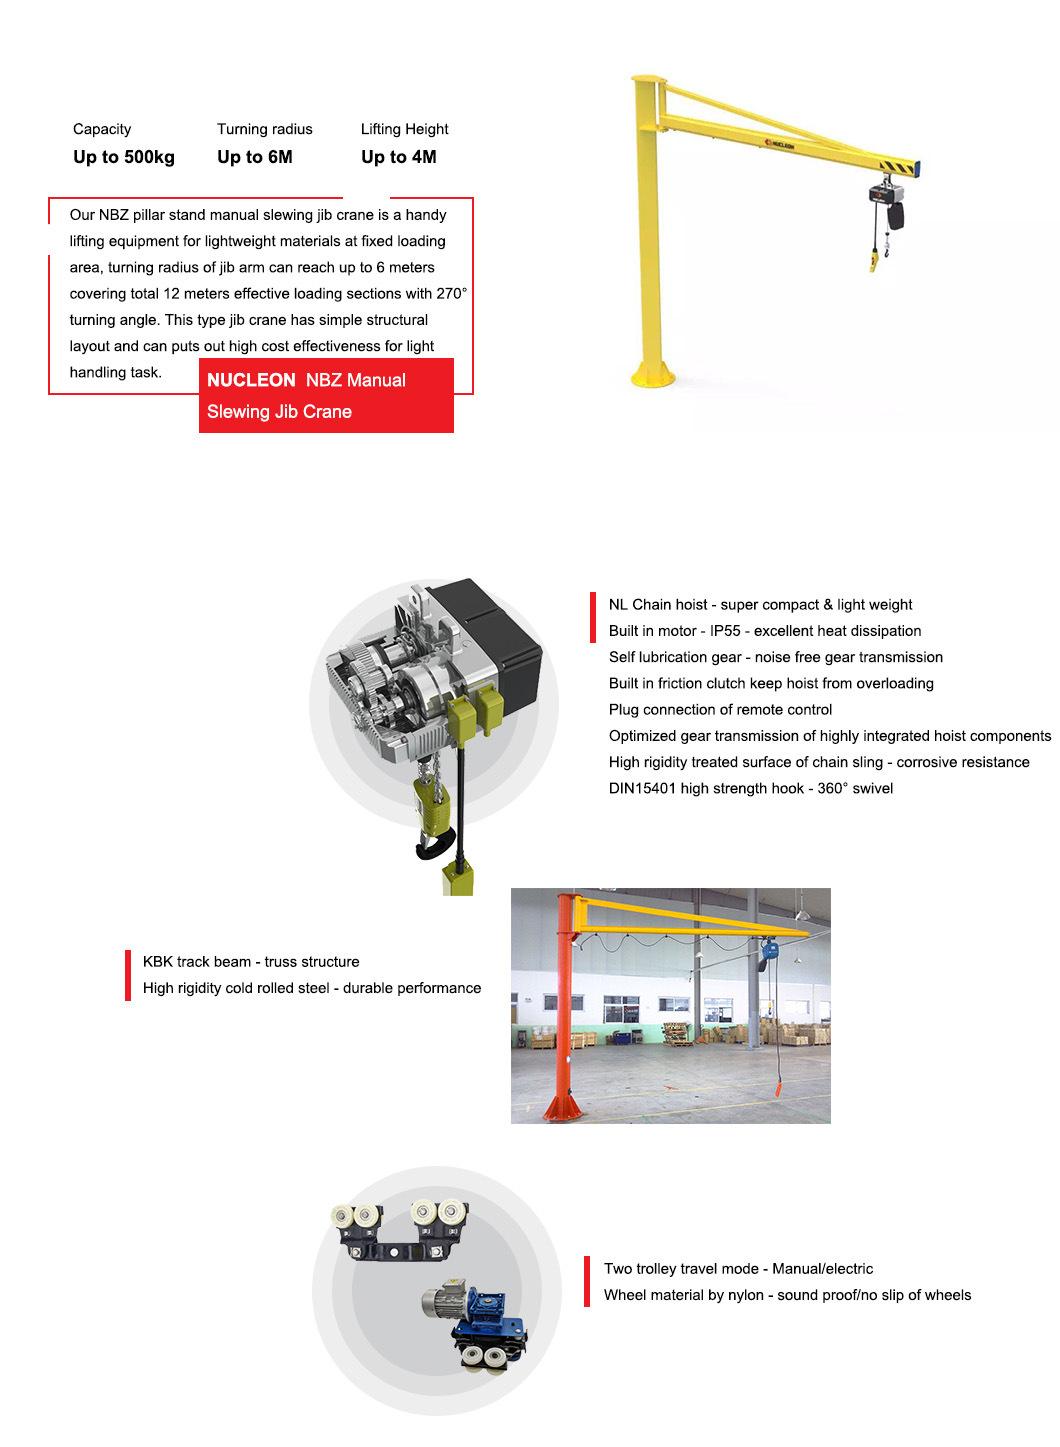 CE Certified Workstation 270 Manual Freely Arm Rotating Jib Crane in UK